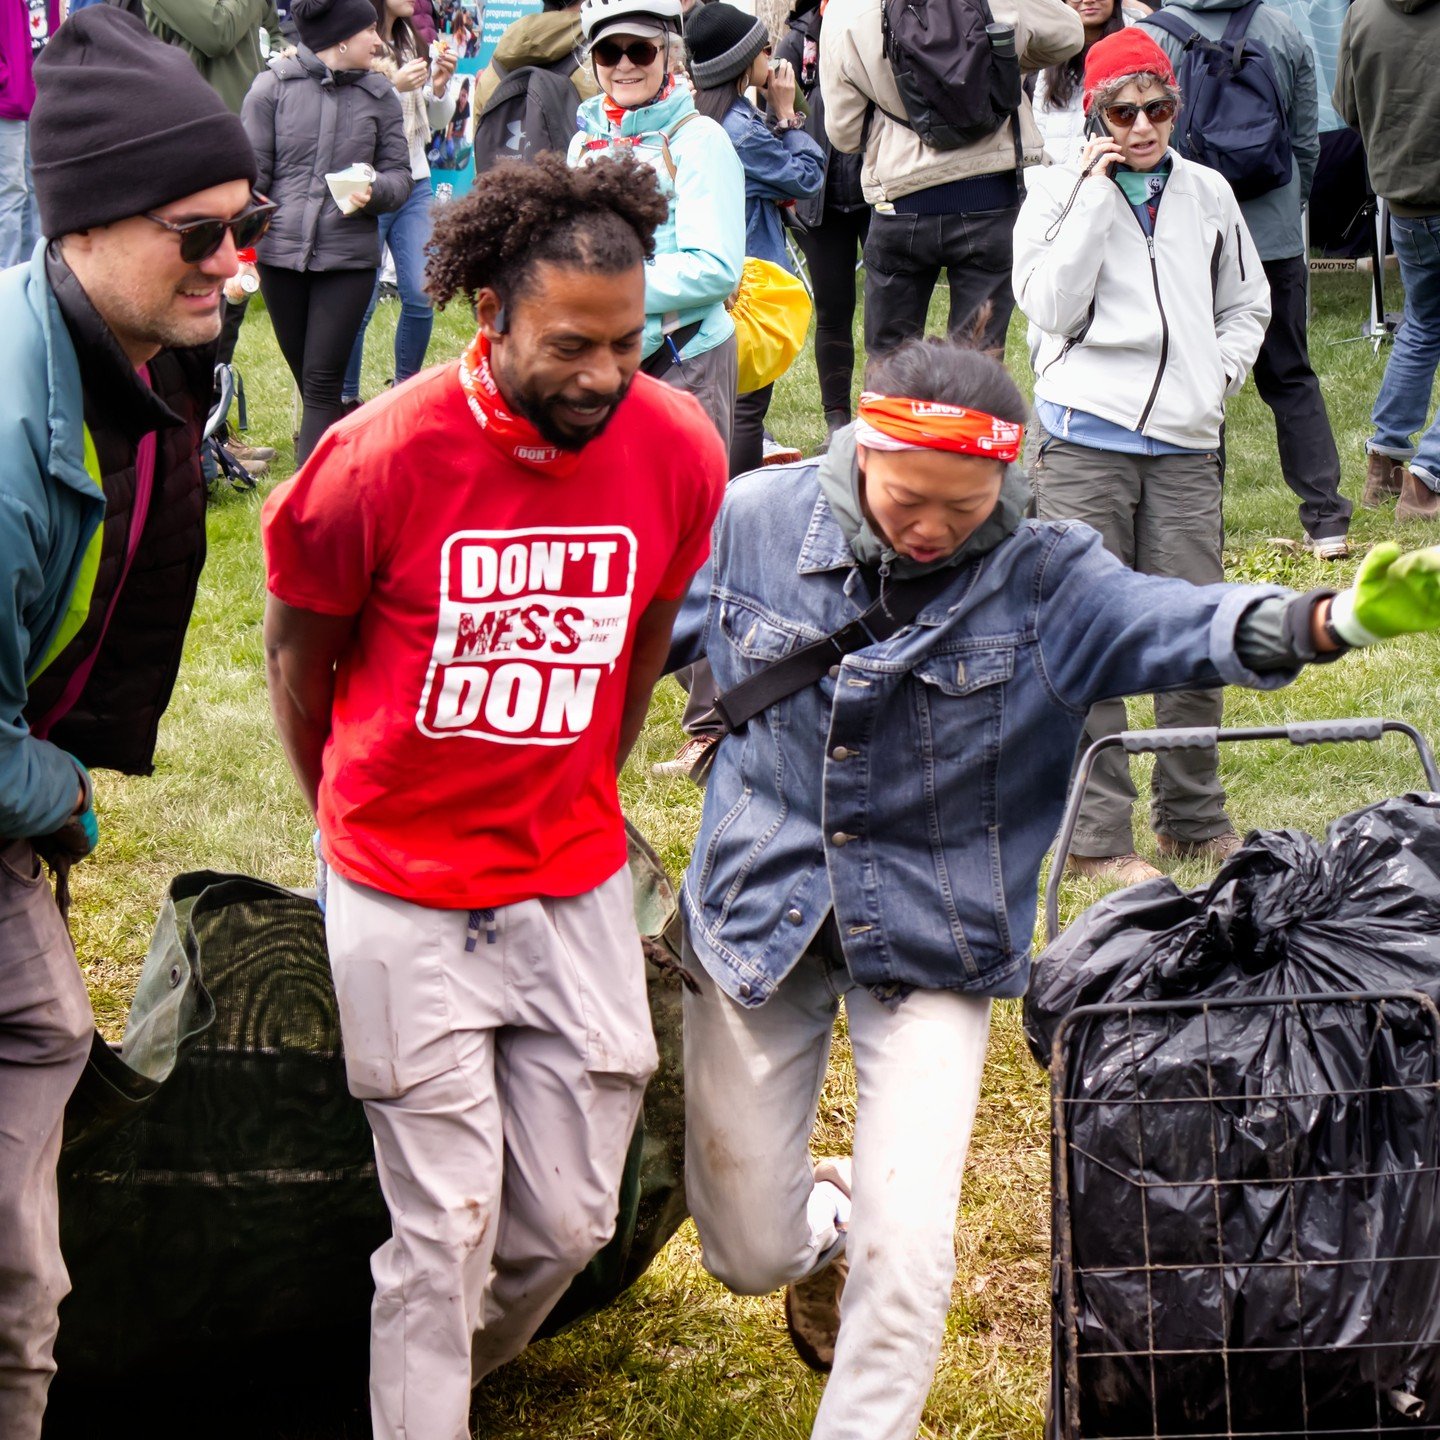 Did you have a great time at our Earth Day event? Looking for another chance to have an impact and clean up some garbage from the Don Valley?
Join us at our next clean up in Taylor Creek Park, on Sunday 12th May, 10am - 1pm.
Registration is at 9:45am